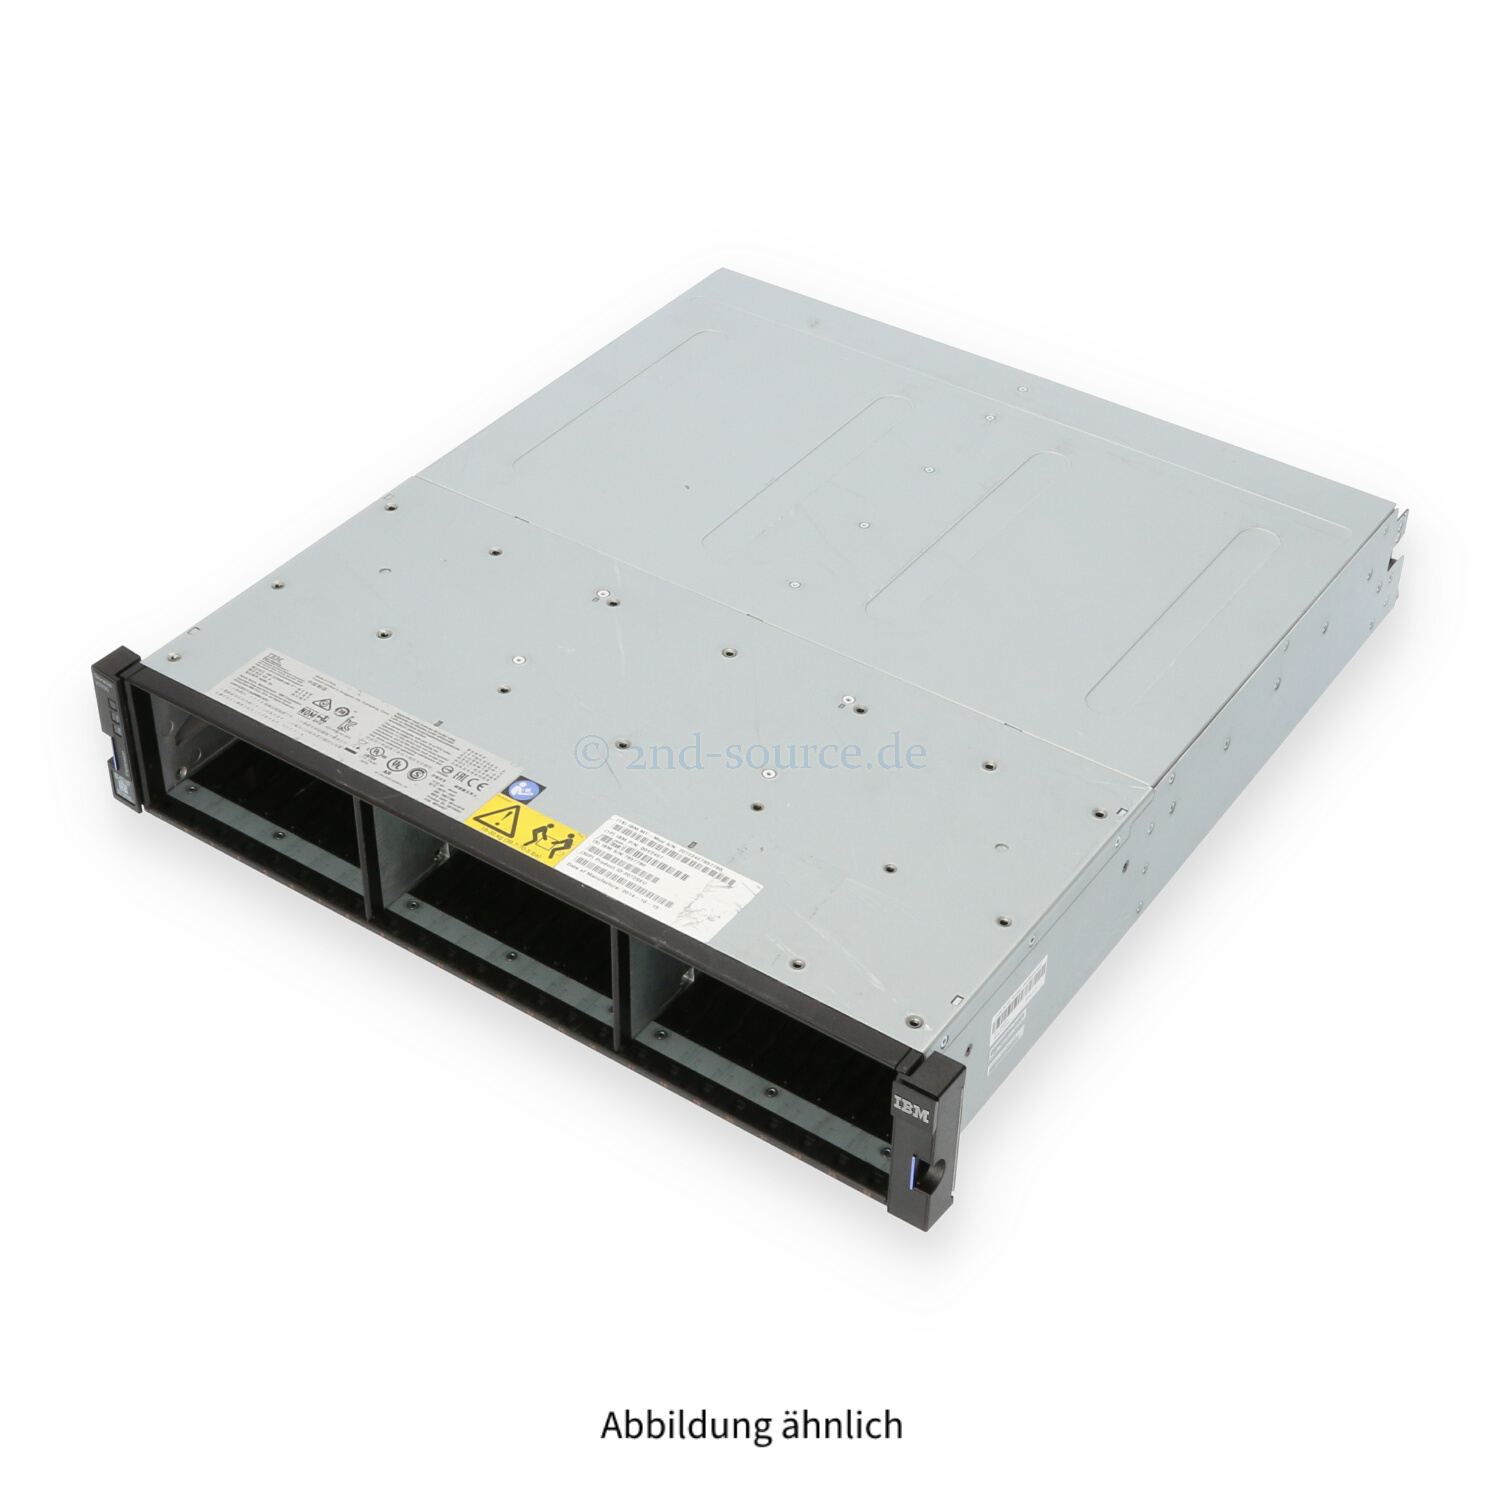 IBM Storwize V3700 24x 2.5'' SFF Expansion Enclosure Chassis 2072-24E 00Y2457